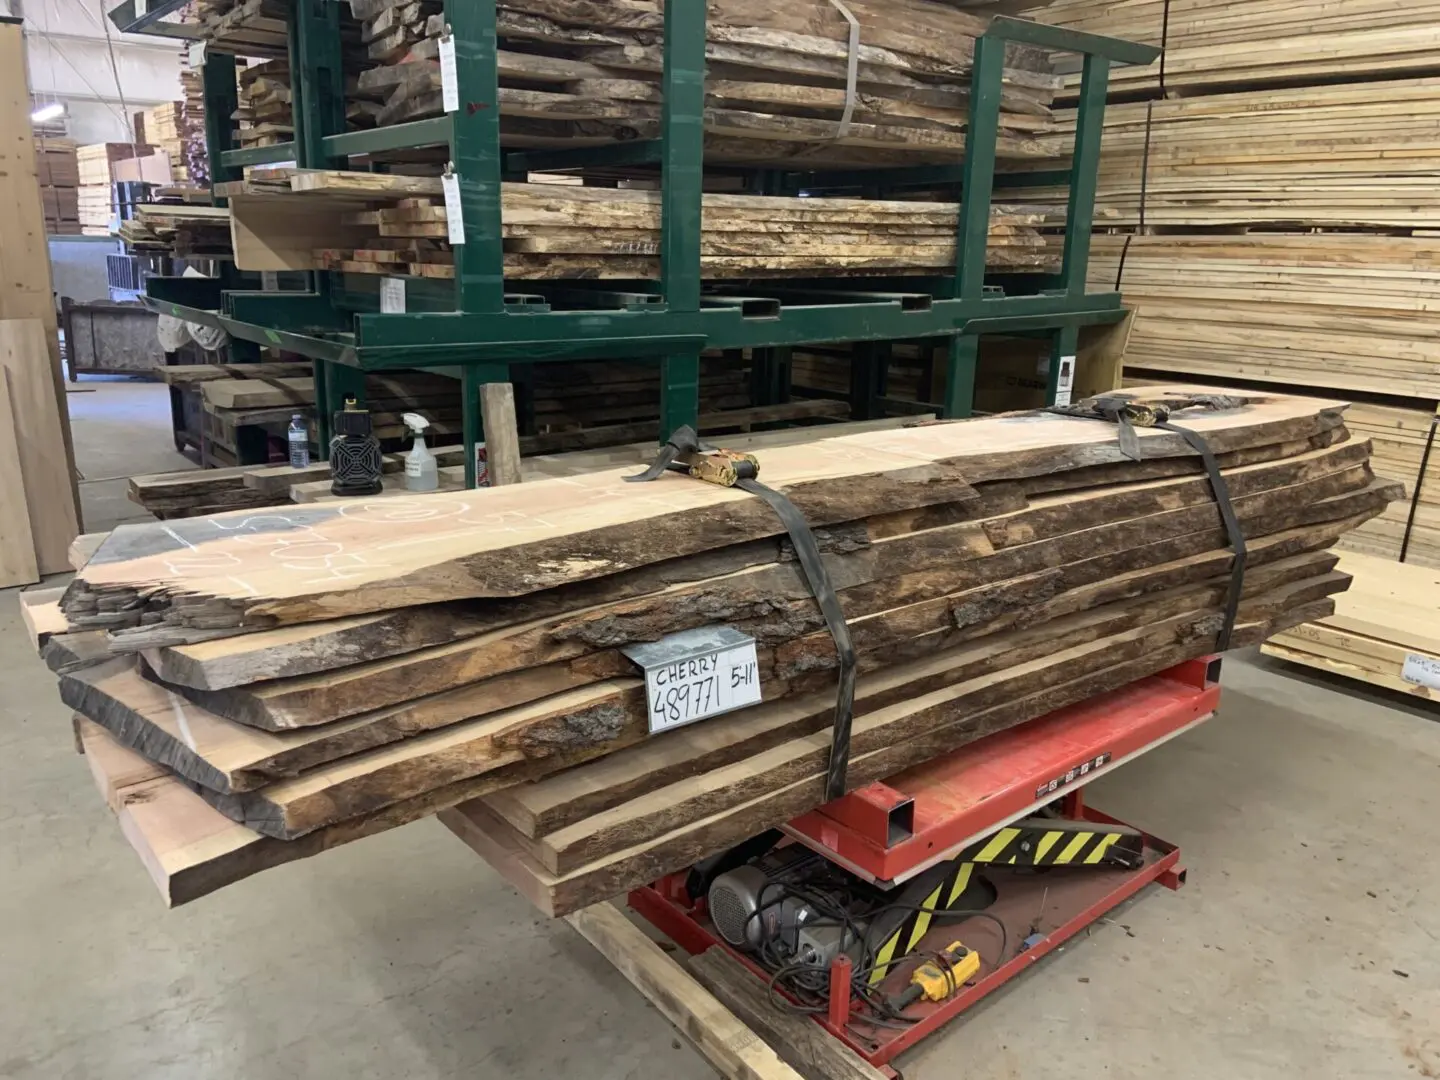 A Bundle of Cherry Logs 489771, Four to Eleven Feet